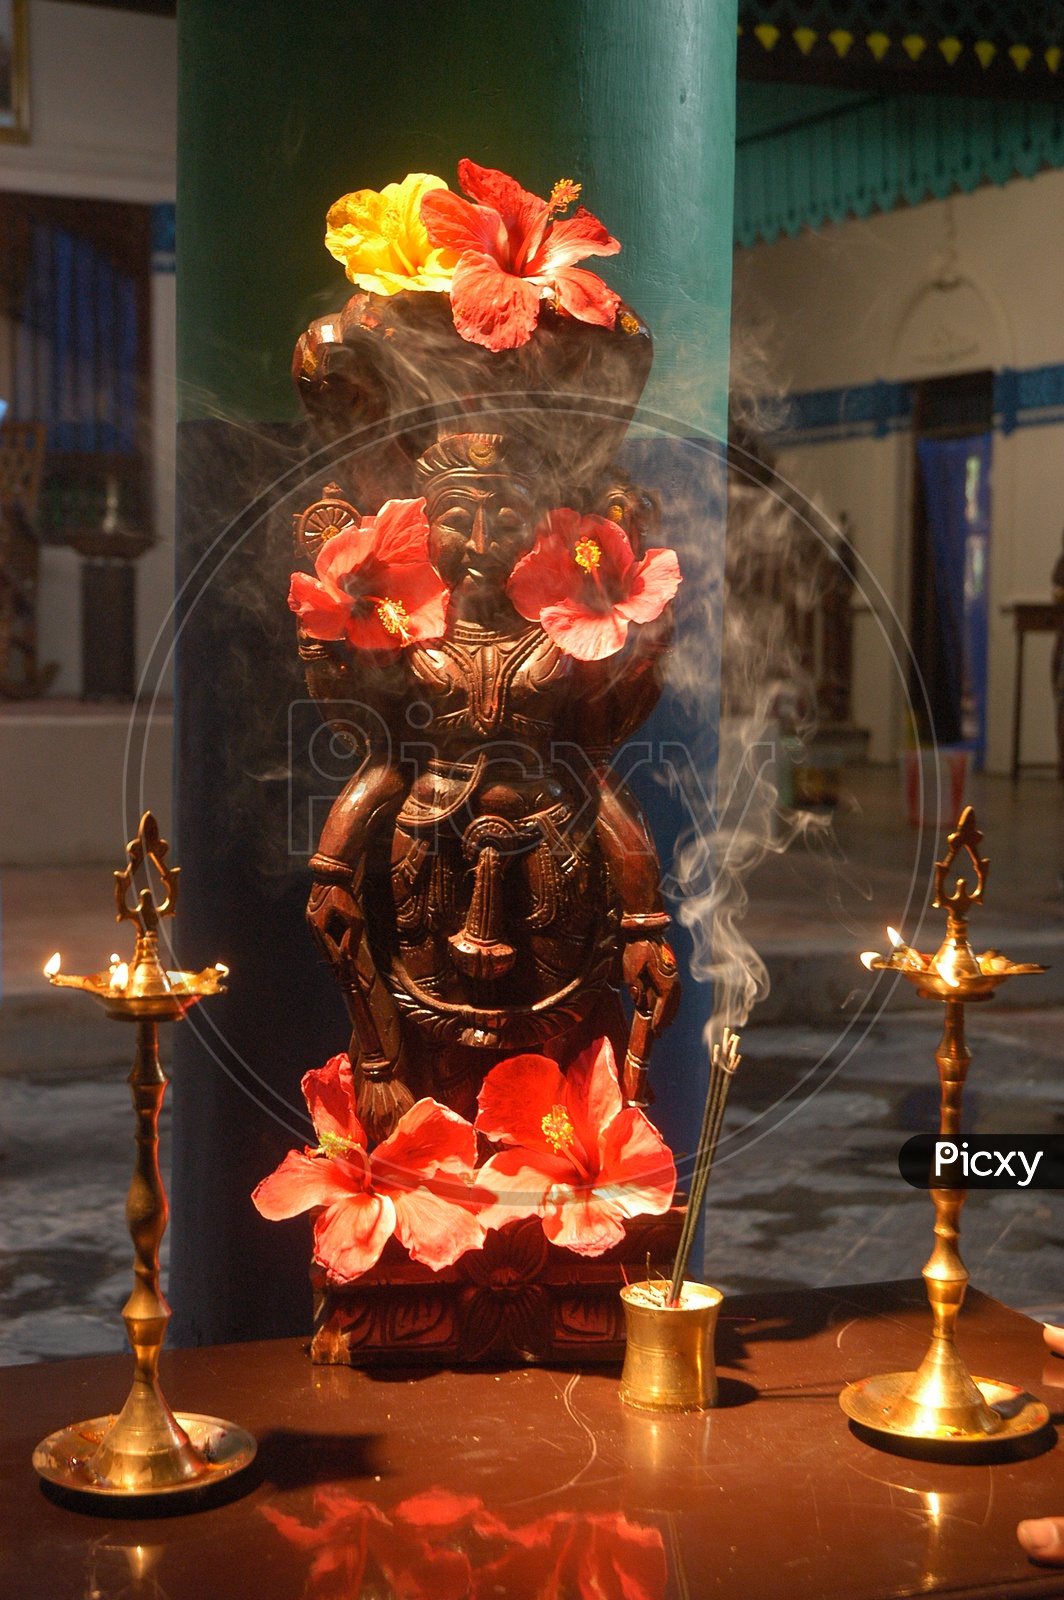 Hindu Goddess statue decorated with flowers